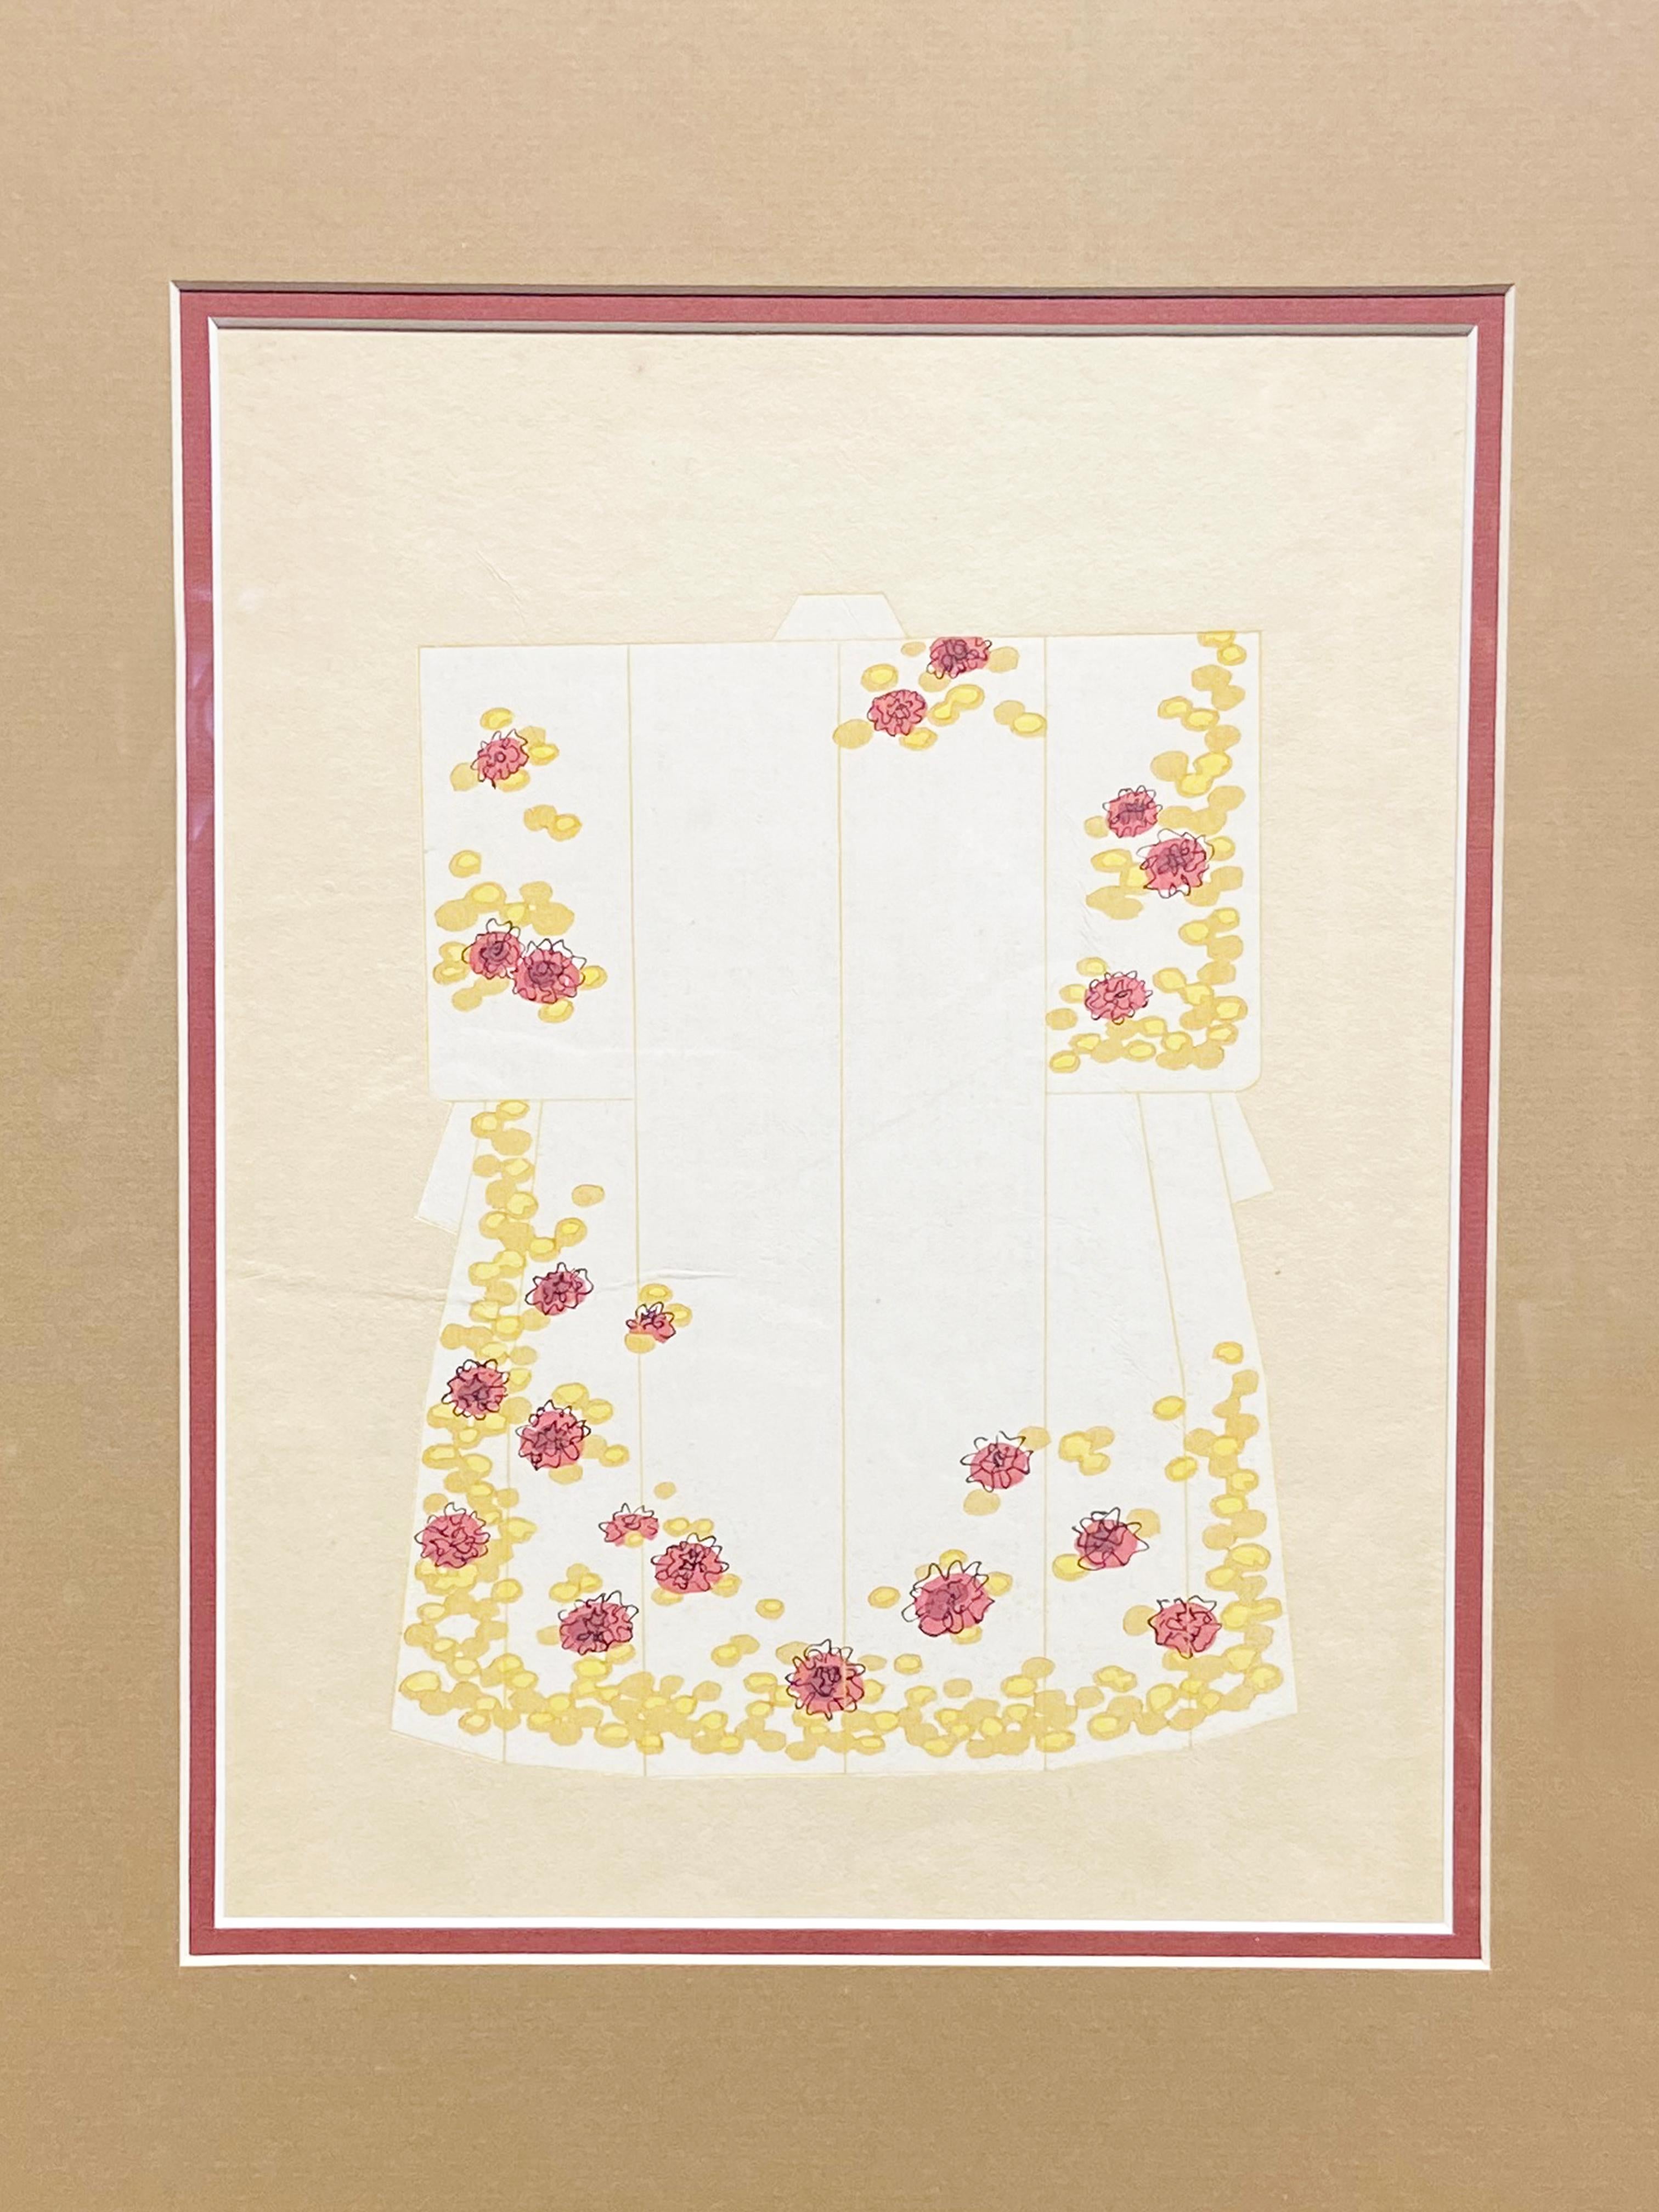 A Japanese handmade woodblock print from the 19th century, depicting a Ceremonial Kimono. Created in Japan during the 19th century, this woodblock print features a white Kimono, adorned with yellow and pink floral accents. The process of woodblock